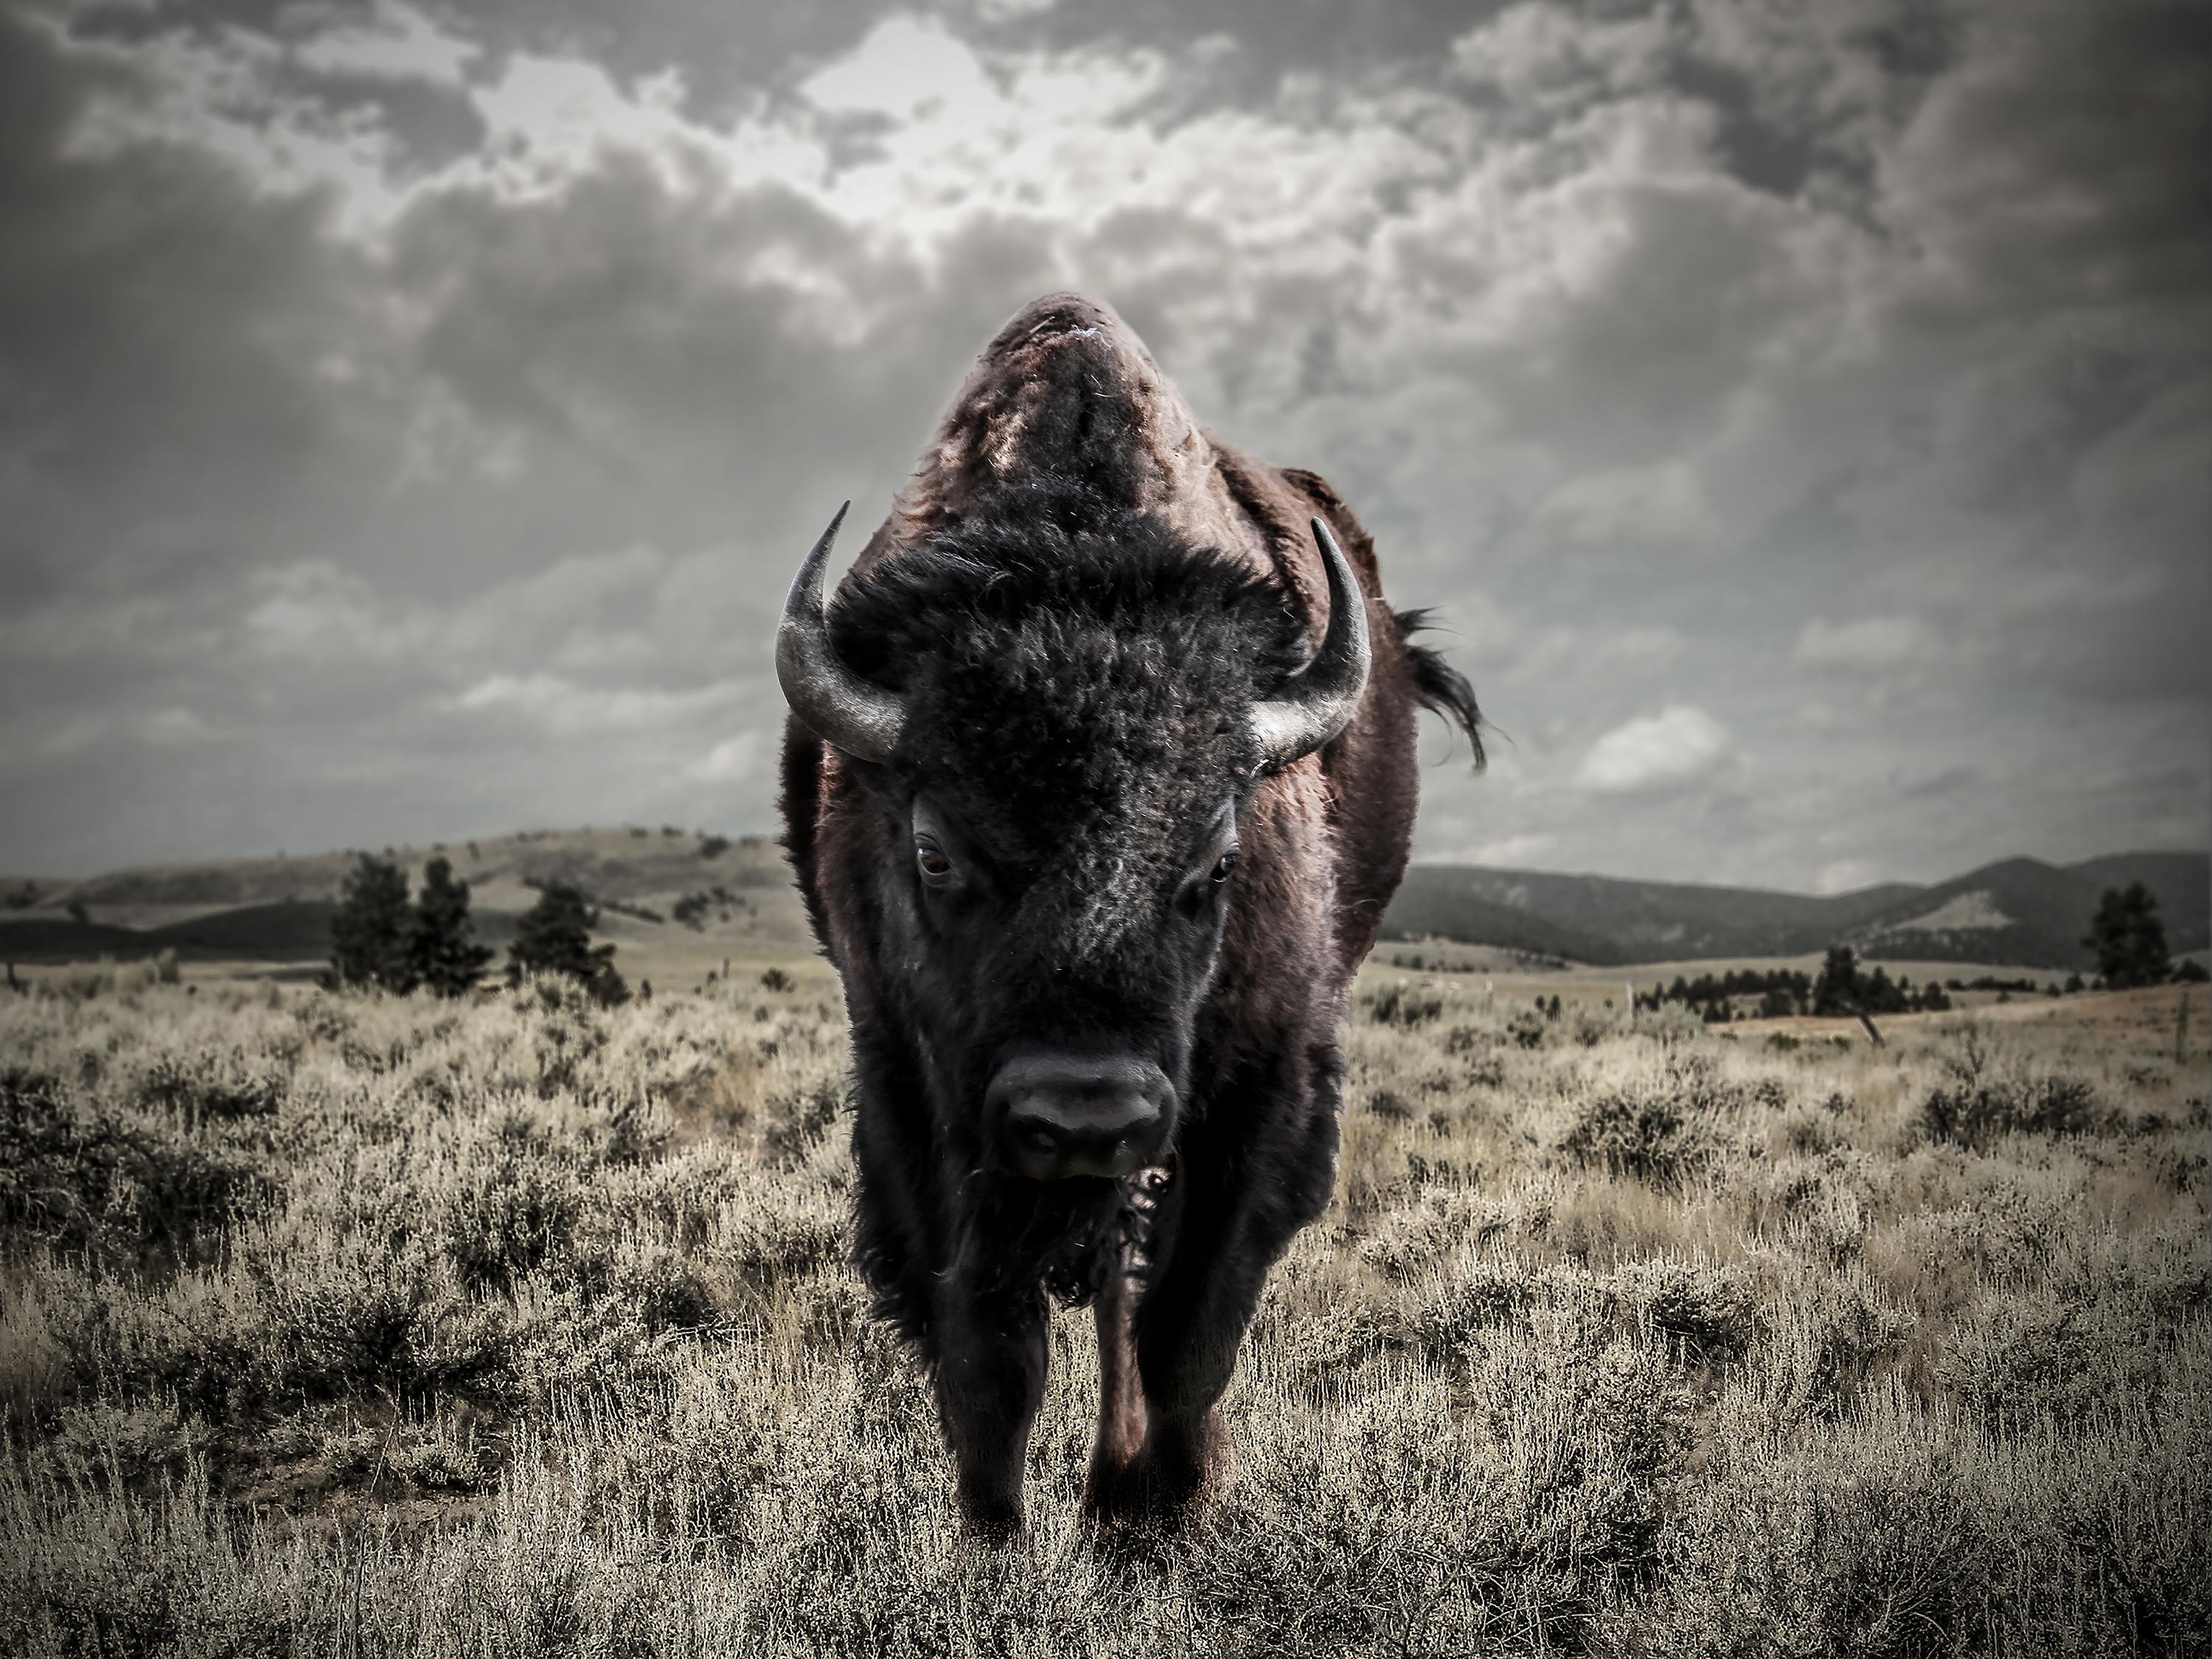 Shane Russeck Black and White Photograph - "Bison" 36x48 Buffalo Photography, Fine Art Photograph -Print, Unsigned